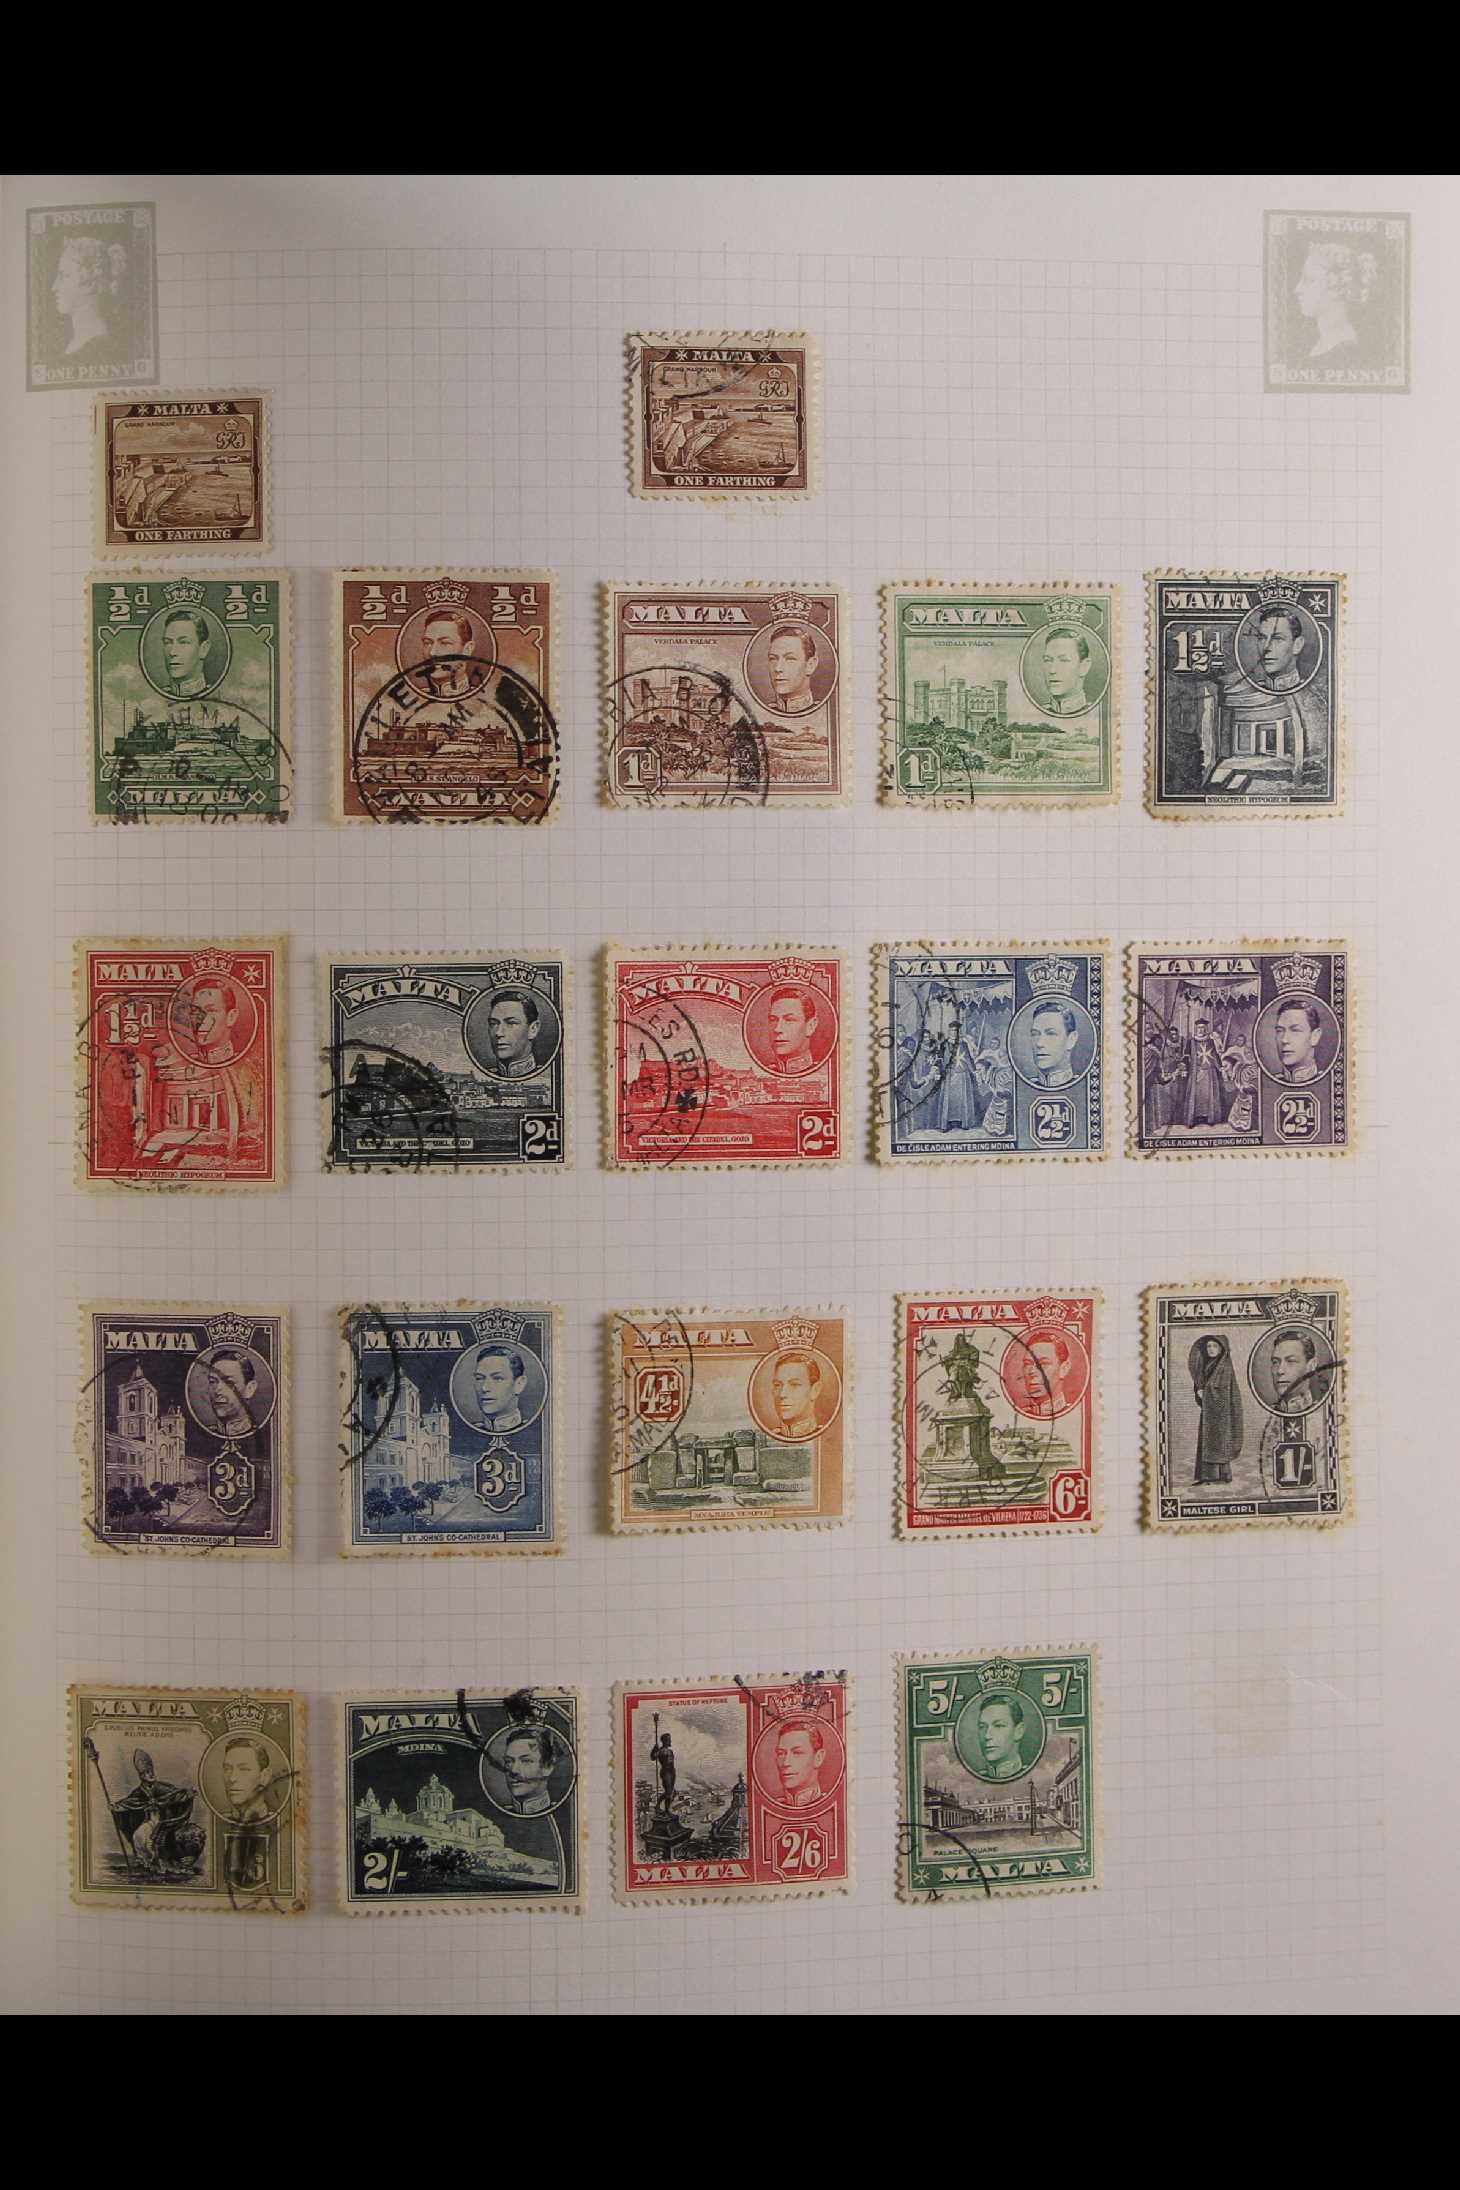 COLLECTIONS & ACCUMULATIONS WORLD A - Z IN 3 SG "WYON" ALBUMS in slip cases, Algeria to Zambia - Image 5 of 5